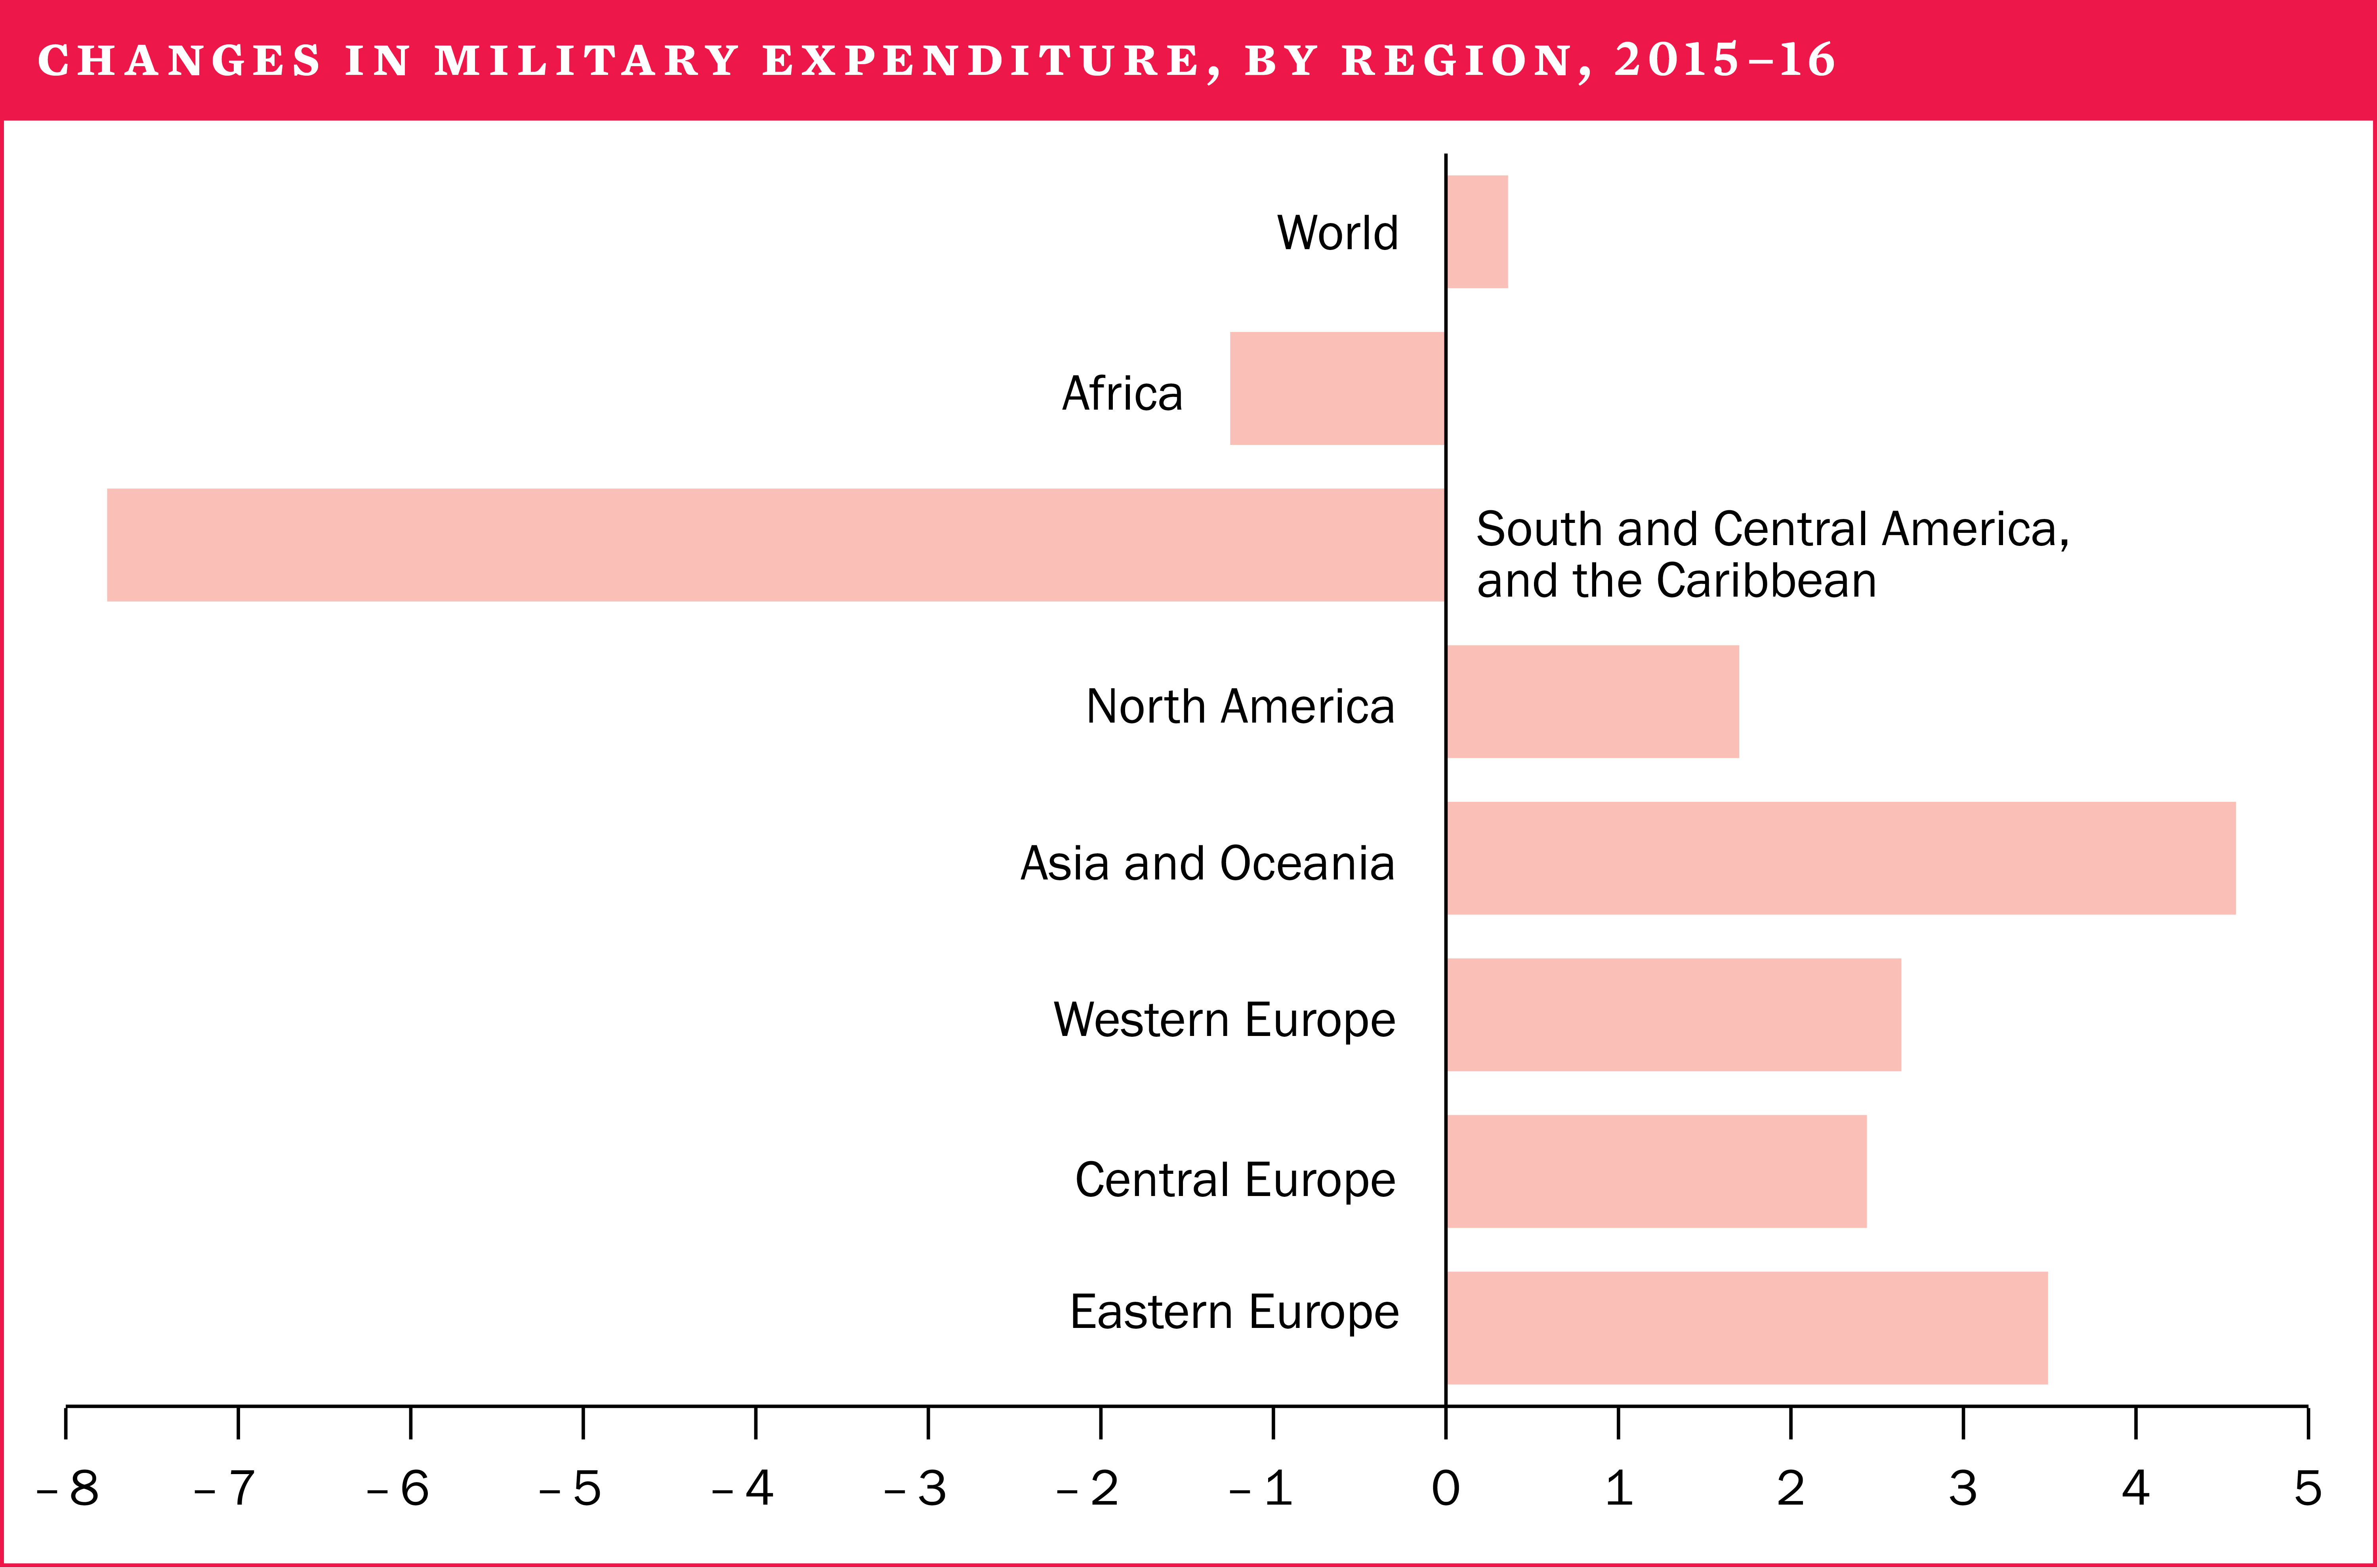 Changes in military expenditure, by region, 2015-2016